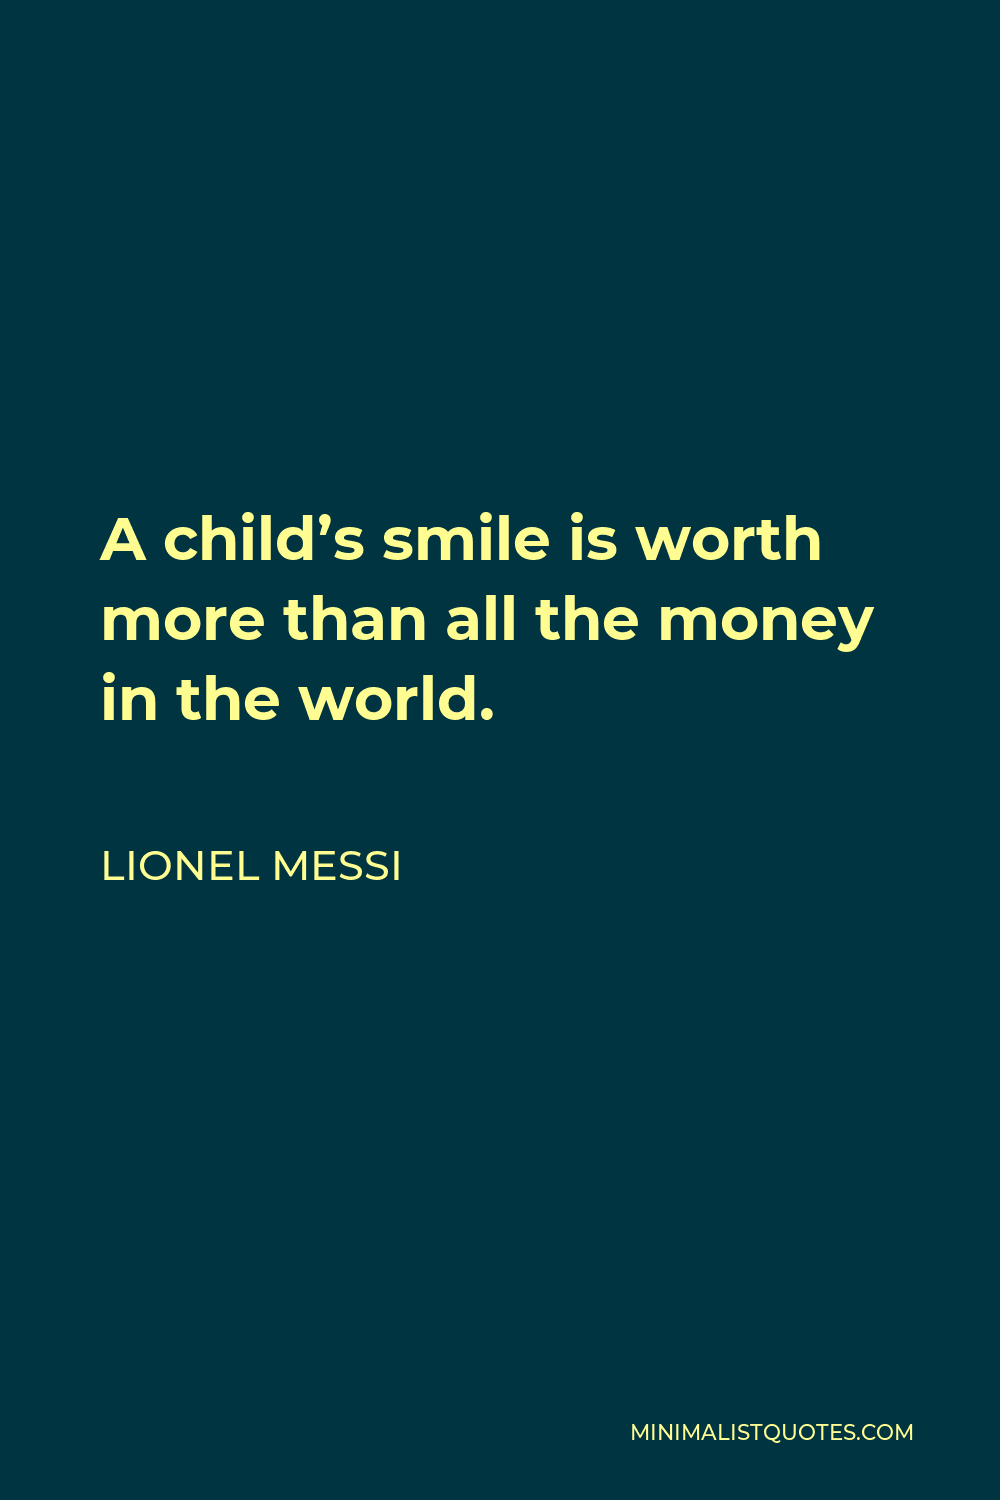 Lionel Messi Quote - A child’s smile is worth more than all the money in the world.